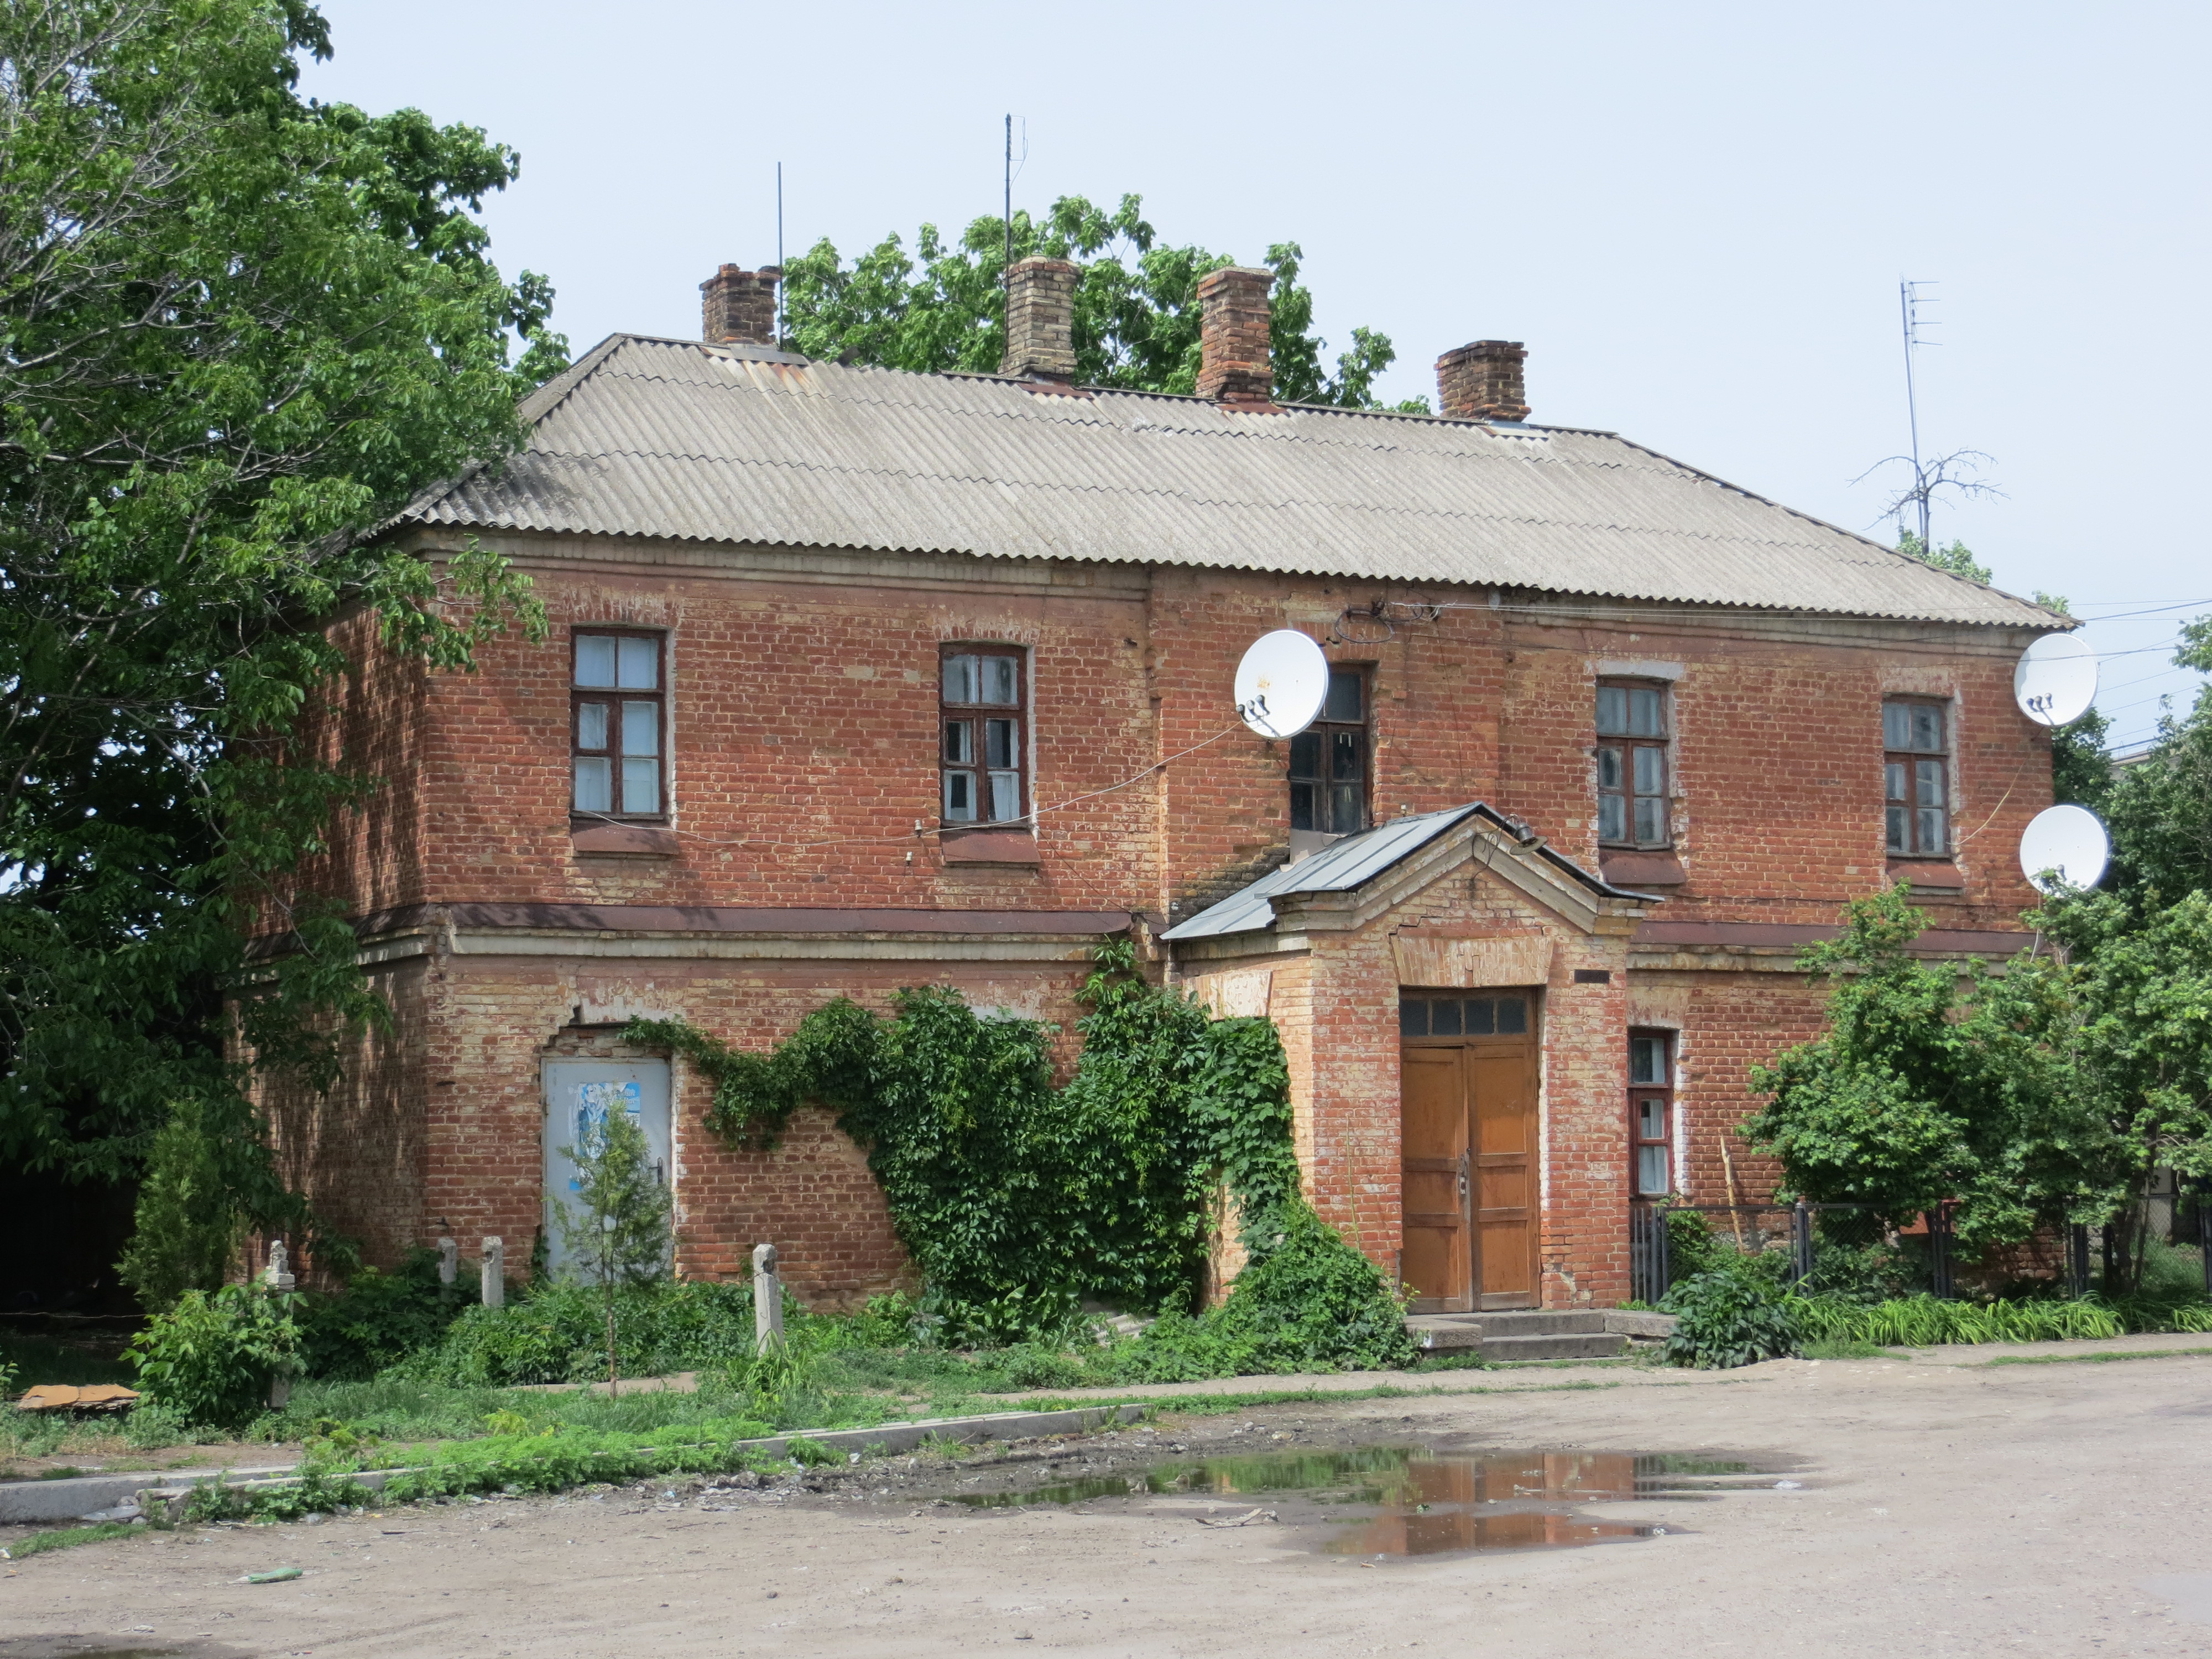 Large building near railway;possibly
                          former family home or public building